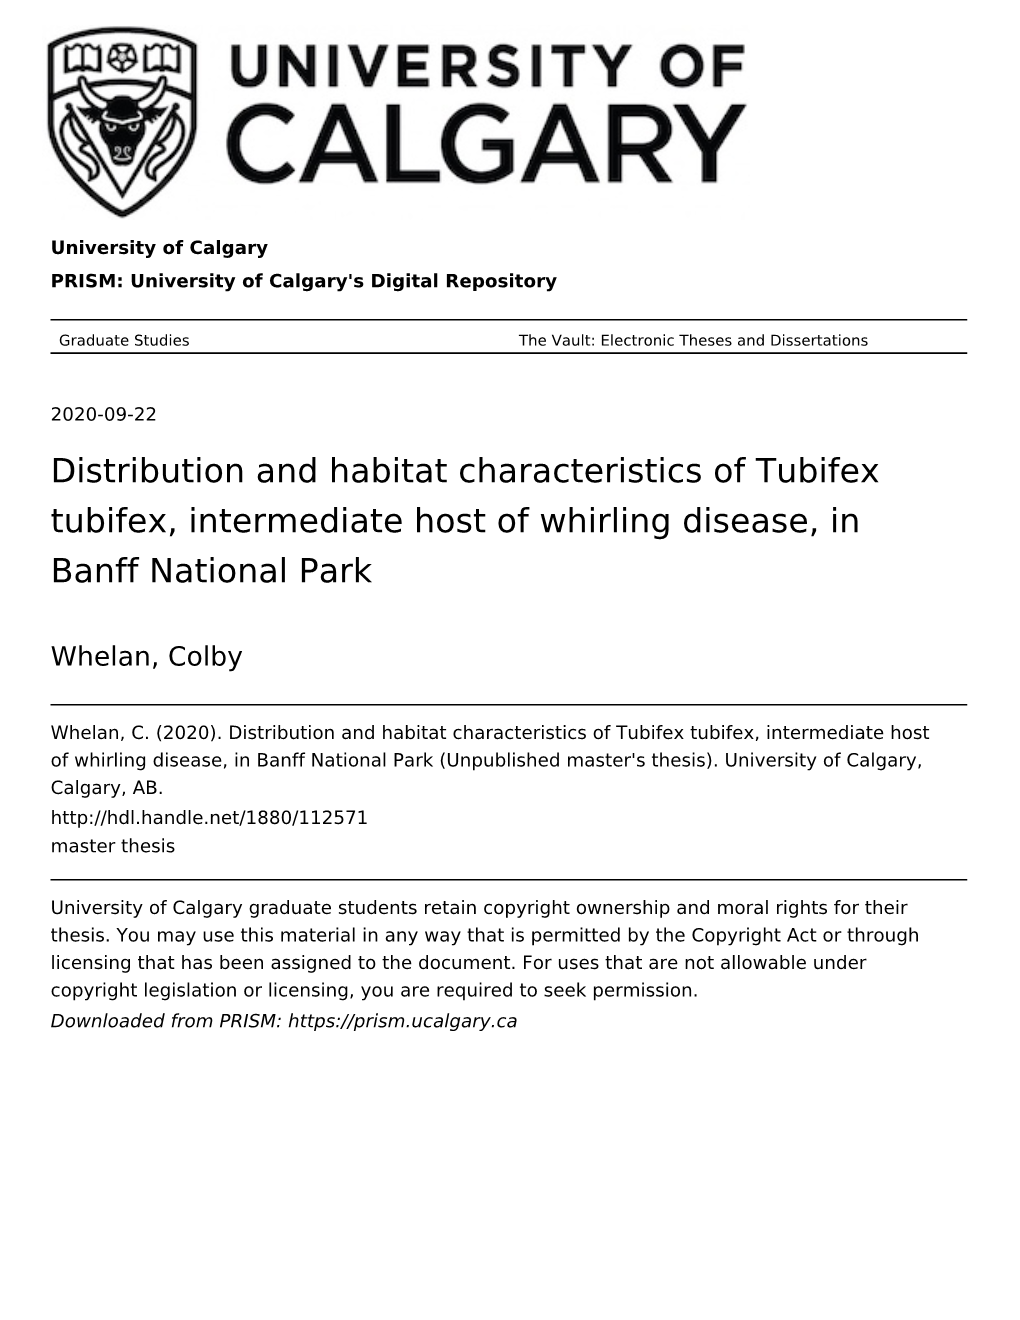 Distribution and Habitat Characteristics of Tubifex Tubifex, Intermediate Host of Whirling Disease, in Banff National Park